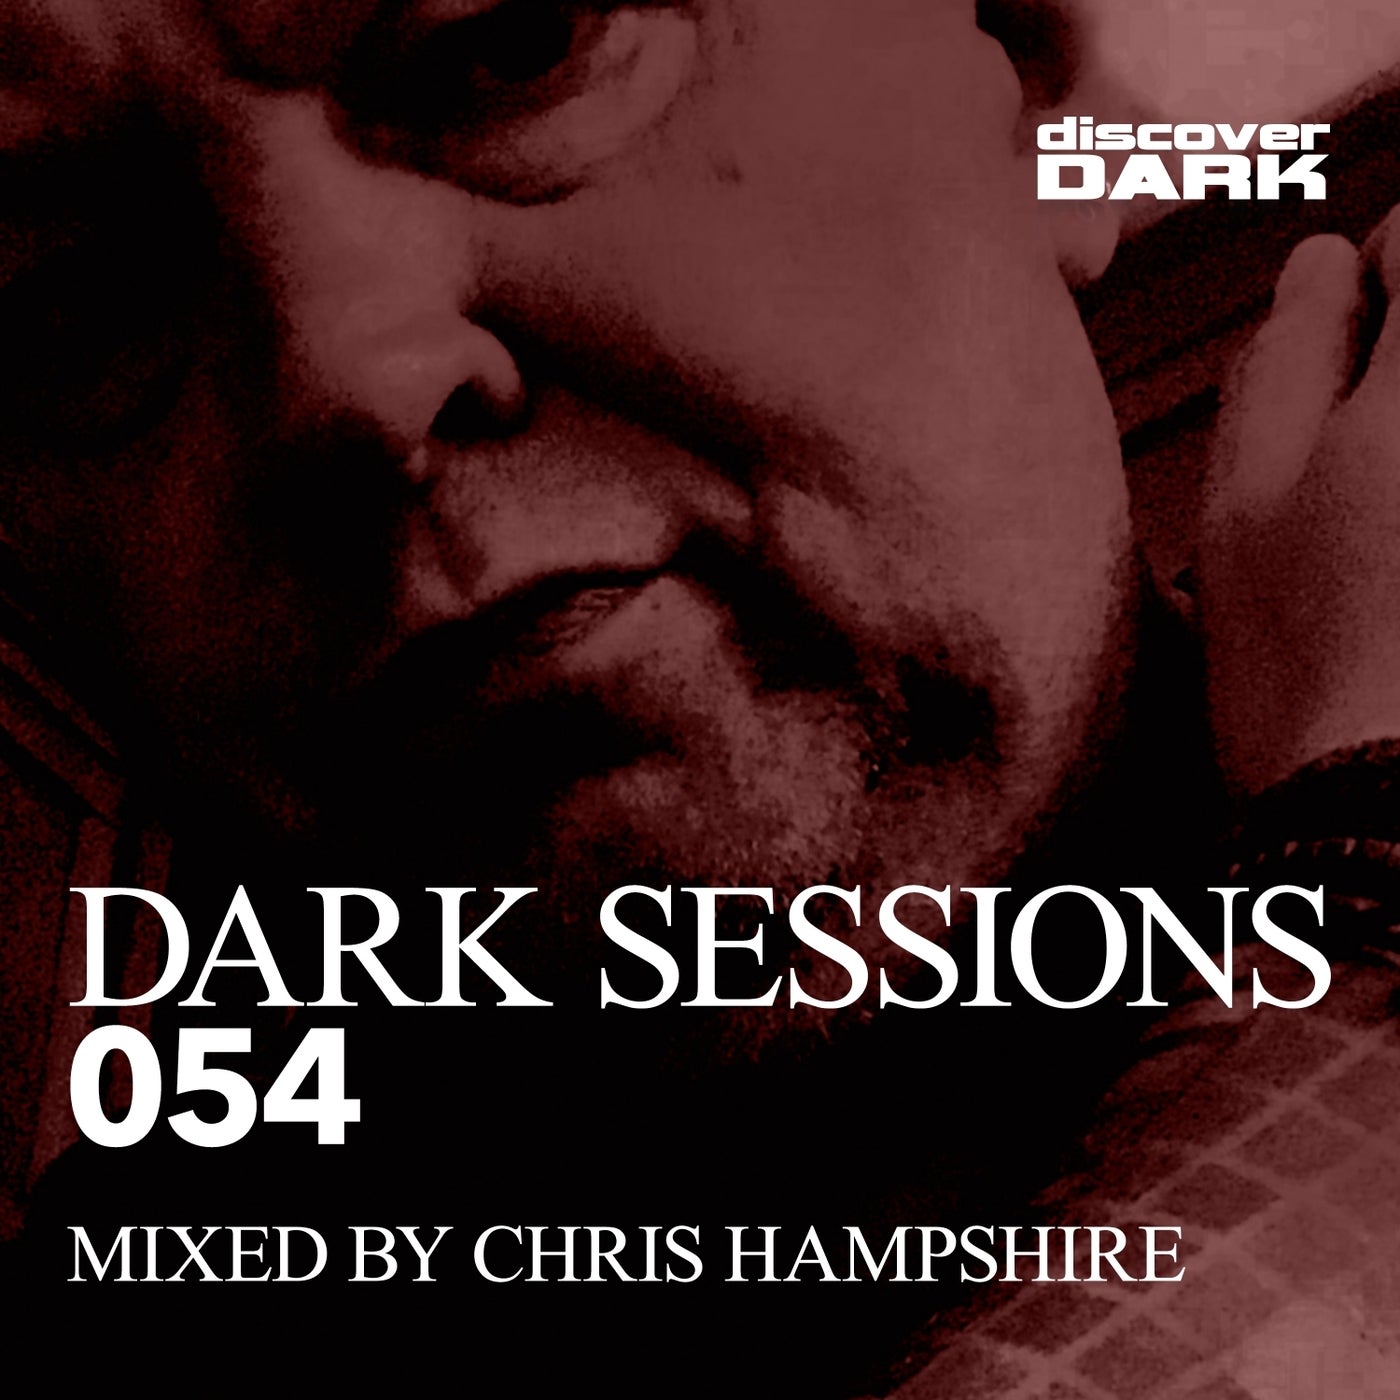 Dark Sessions 054 (Mixed by Chris Hampshire)